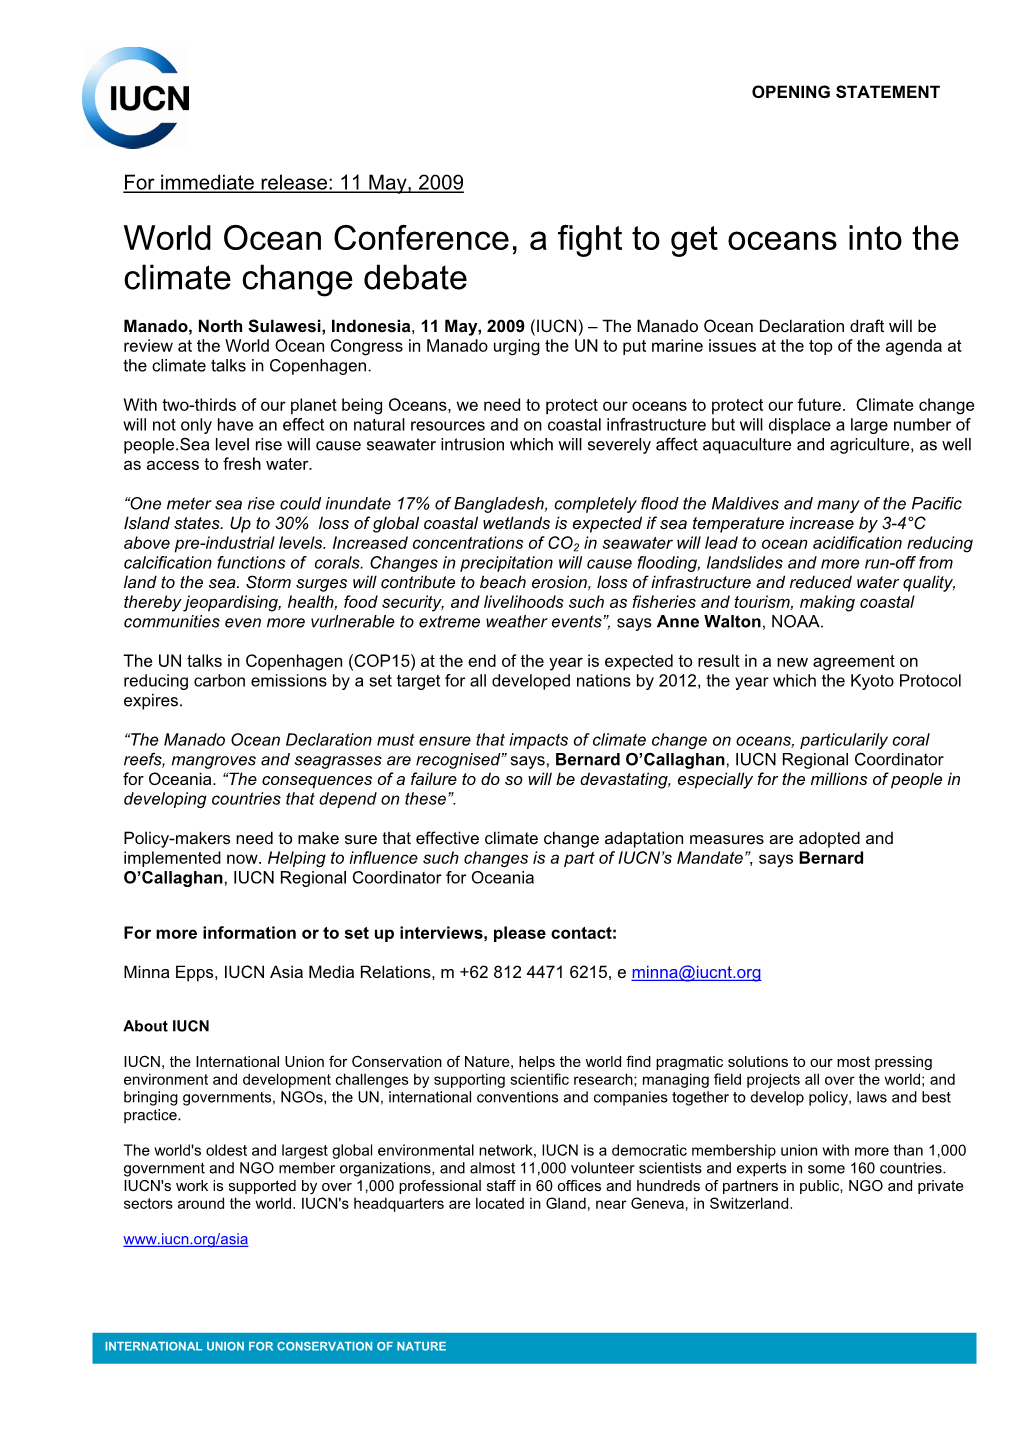 World Ocean Conference, a Fight to Get Oceans Into the Climate Change Debate